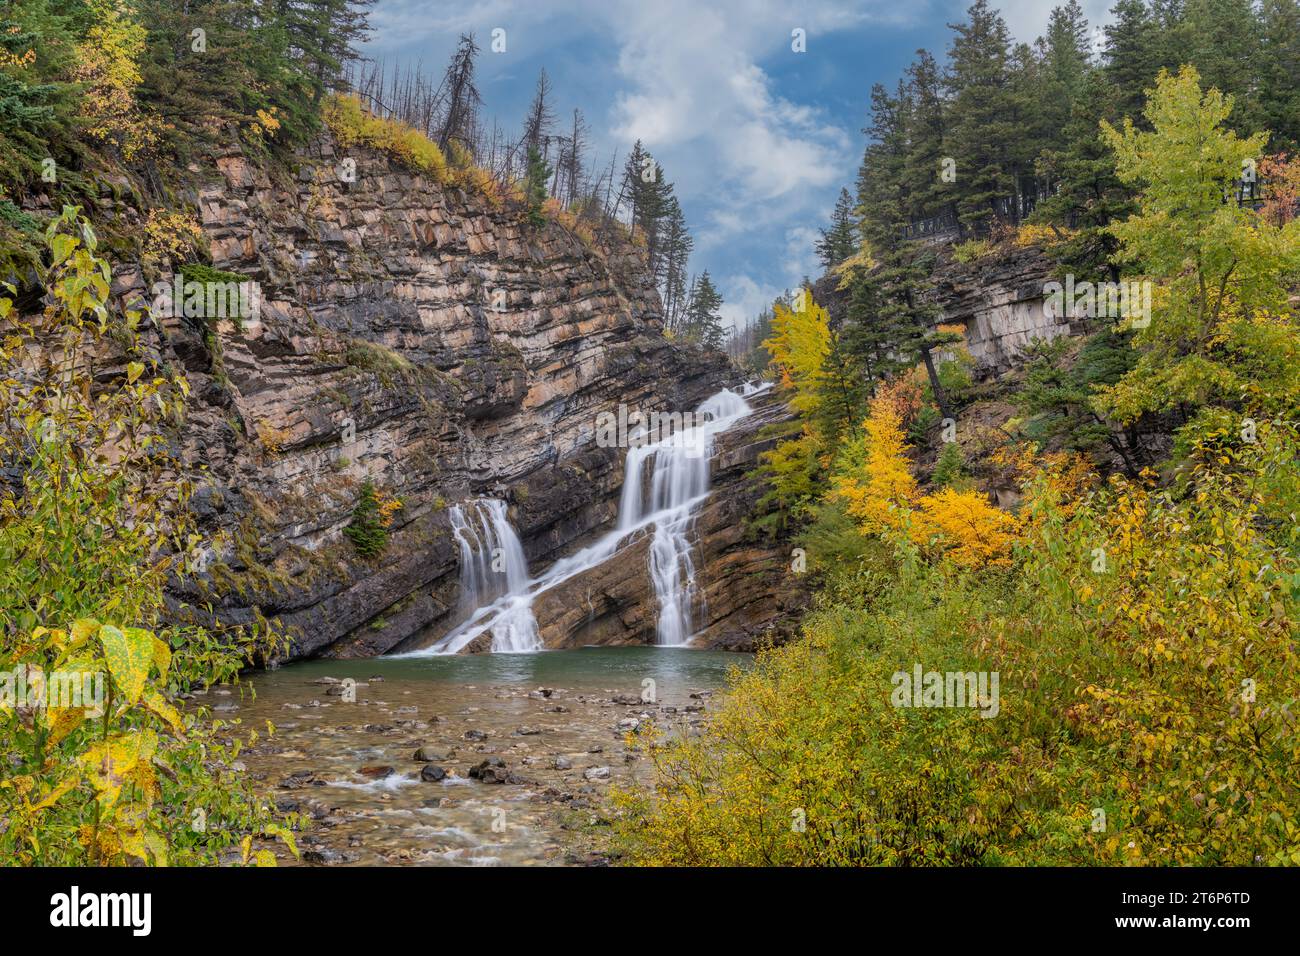 Cameron falls with fall foliage color in Waterton Lakes National Park, Alberta, Canada. Stock Photo